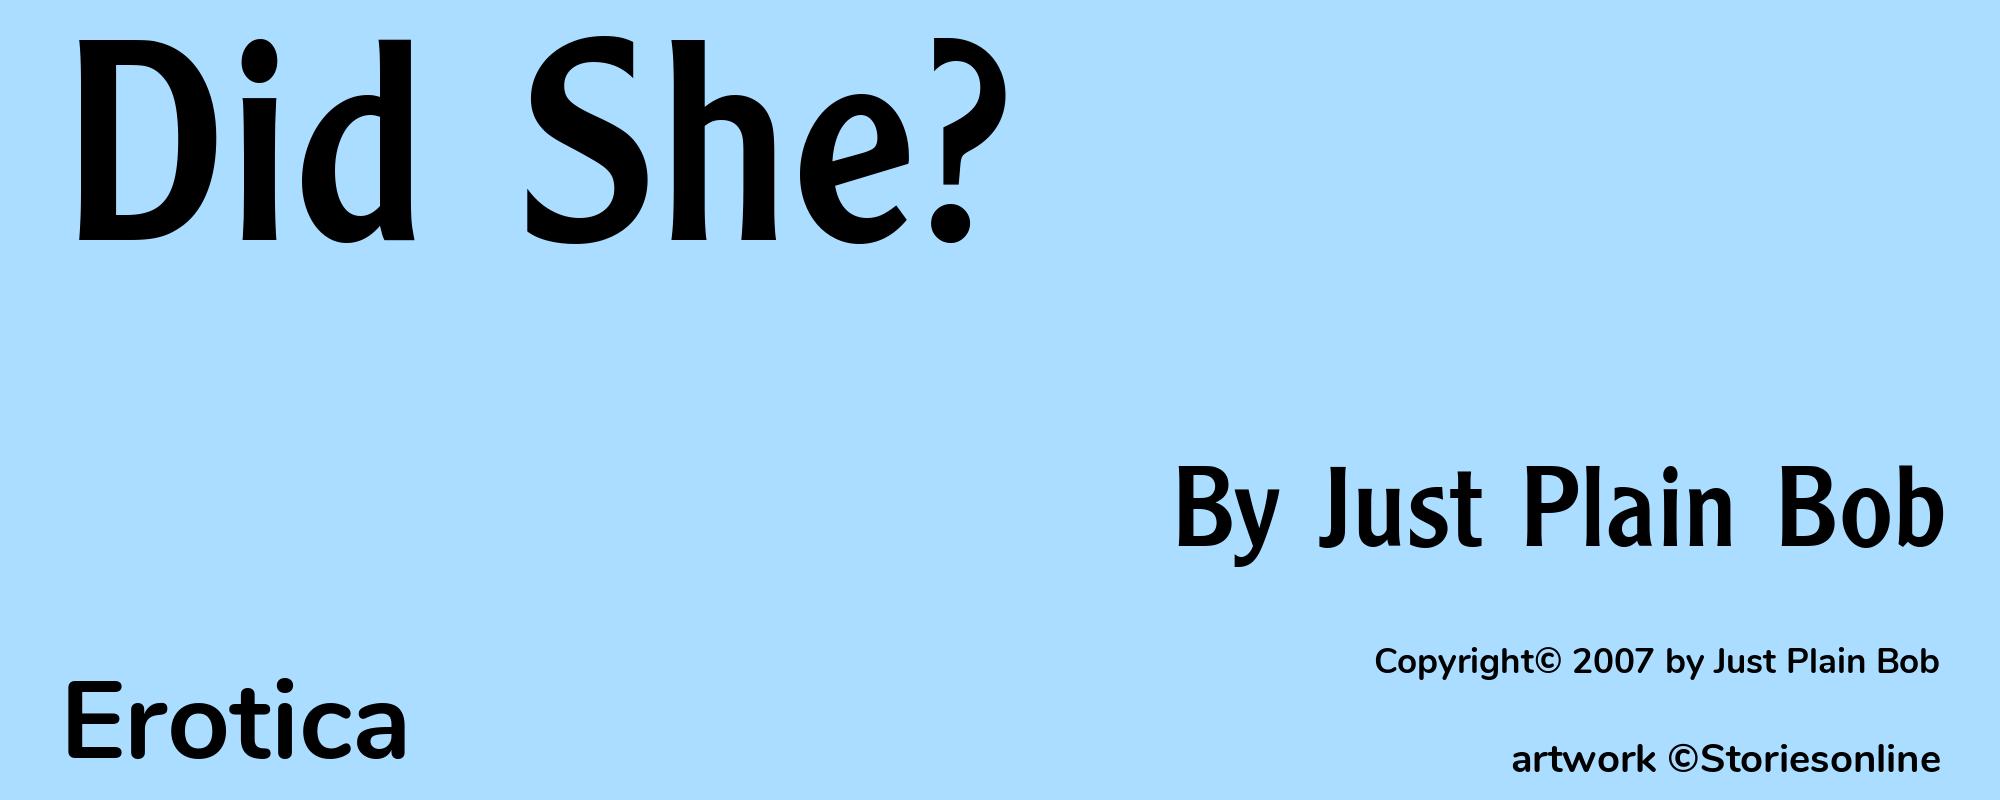 Did She? - Cover